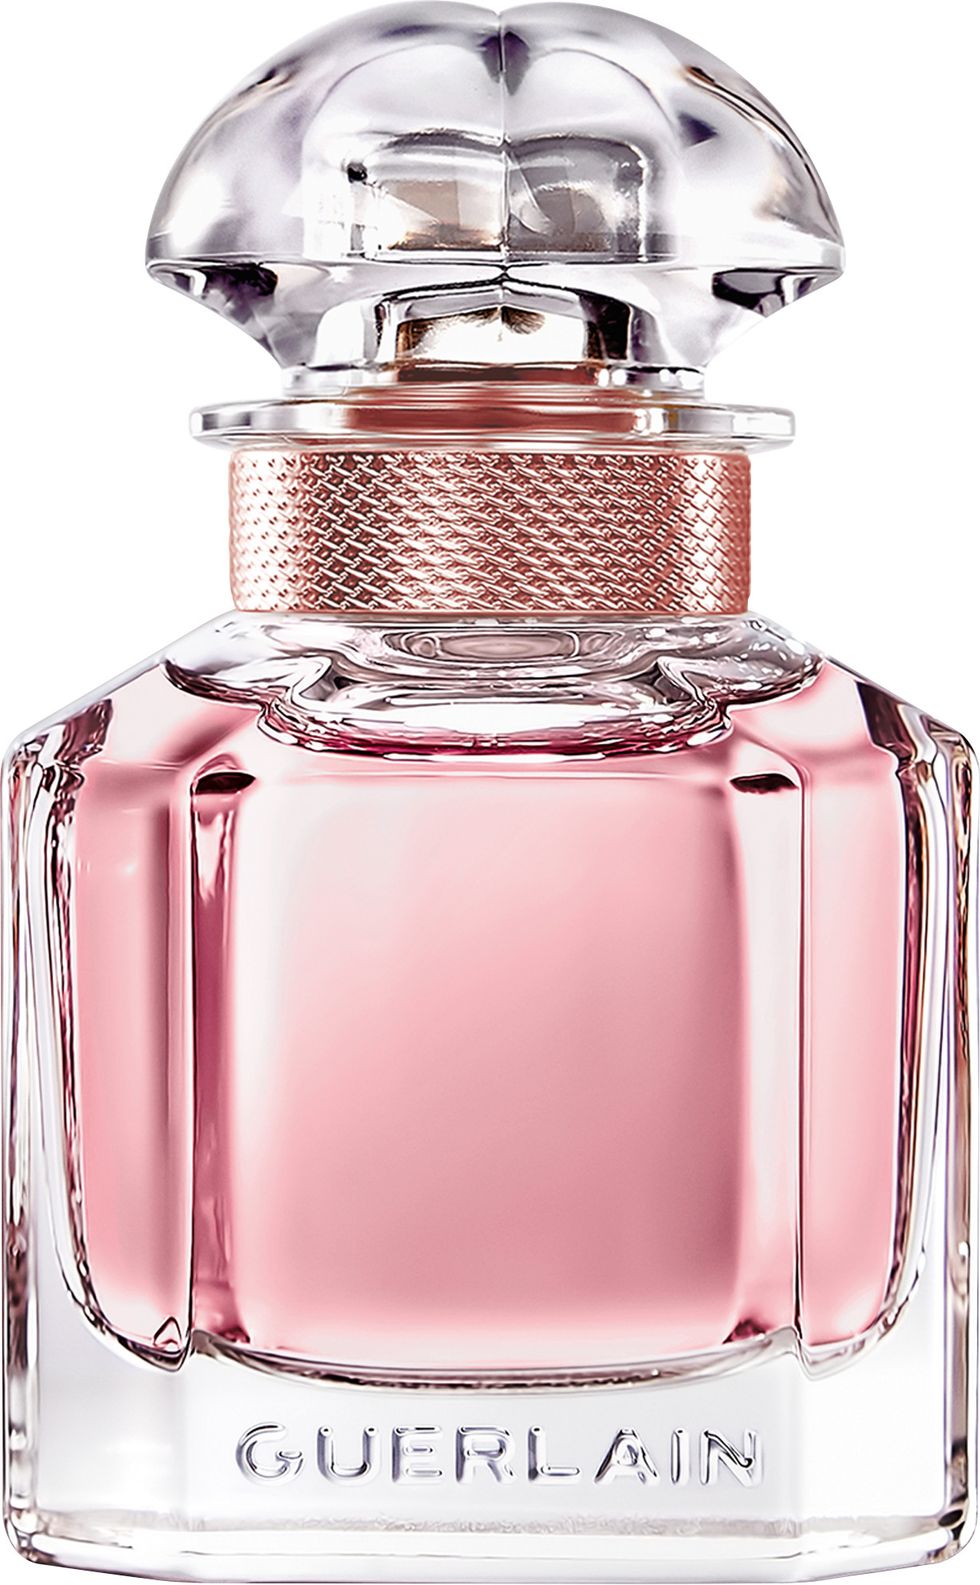 Perfume, Product, Cosmetics, Pink, Water, Liquid, Bottle, Glass bottle, Material property, Fluid, 